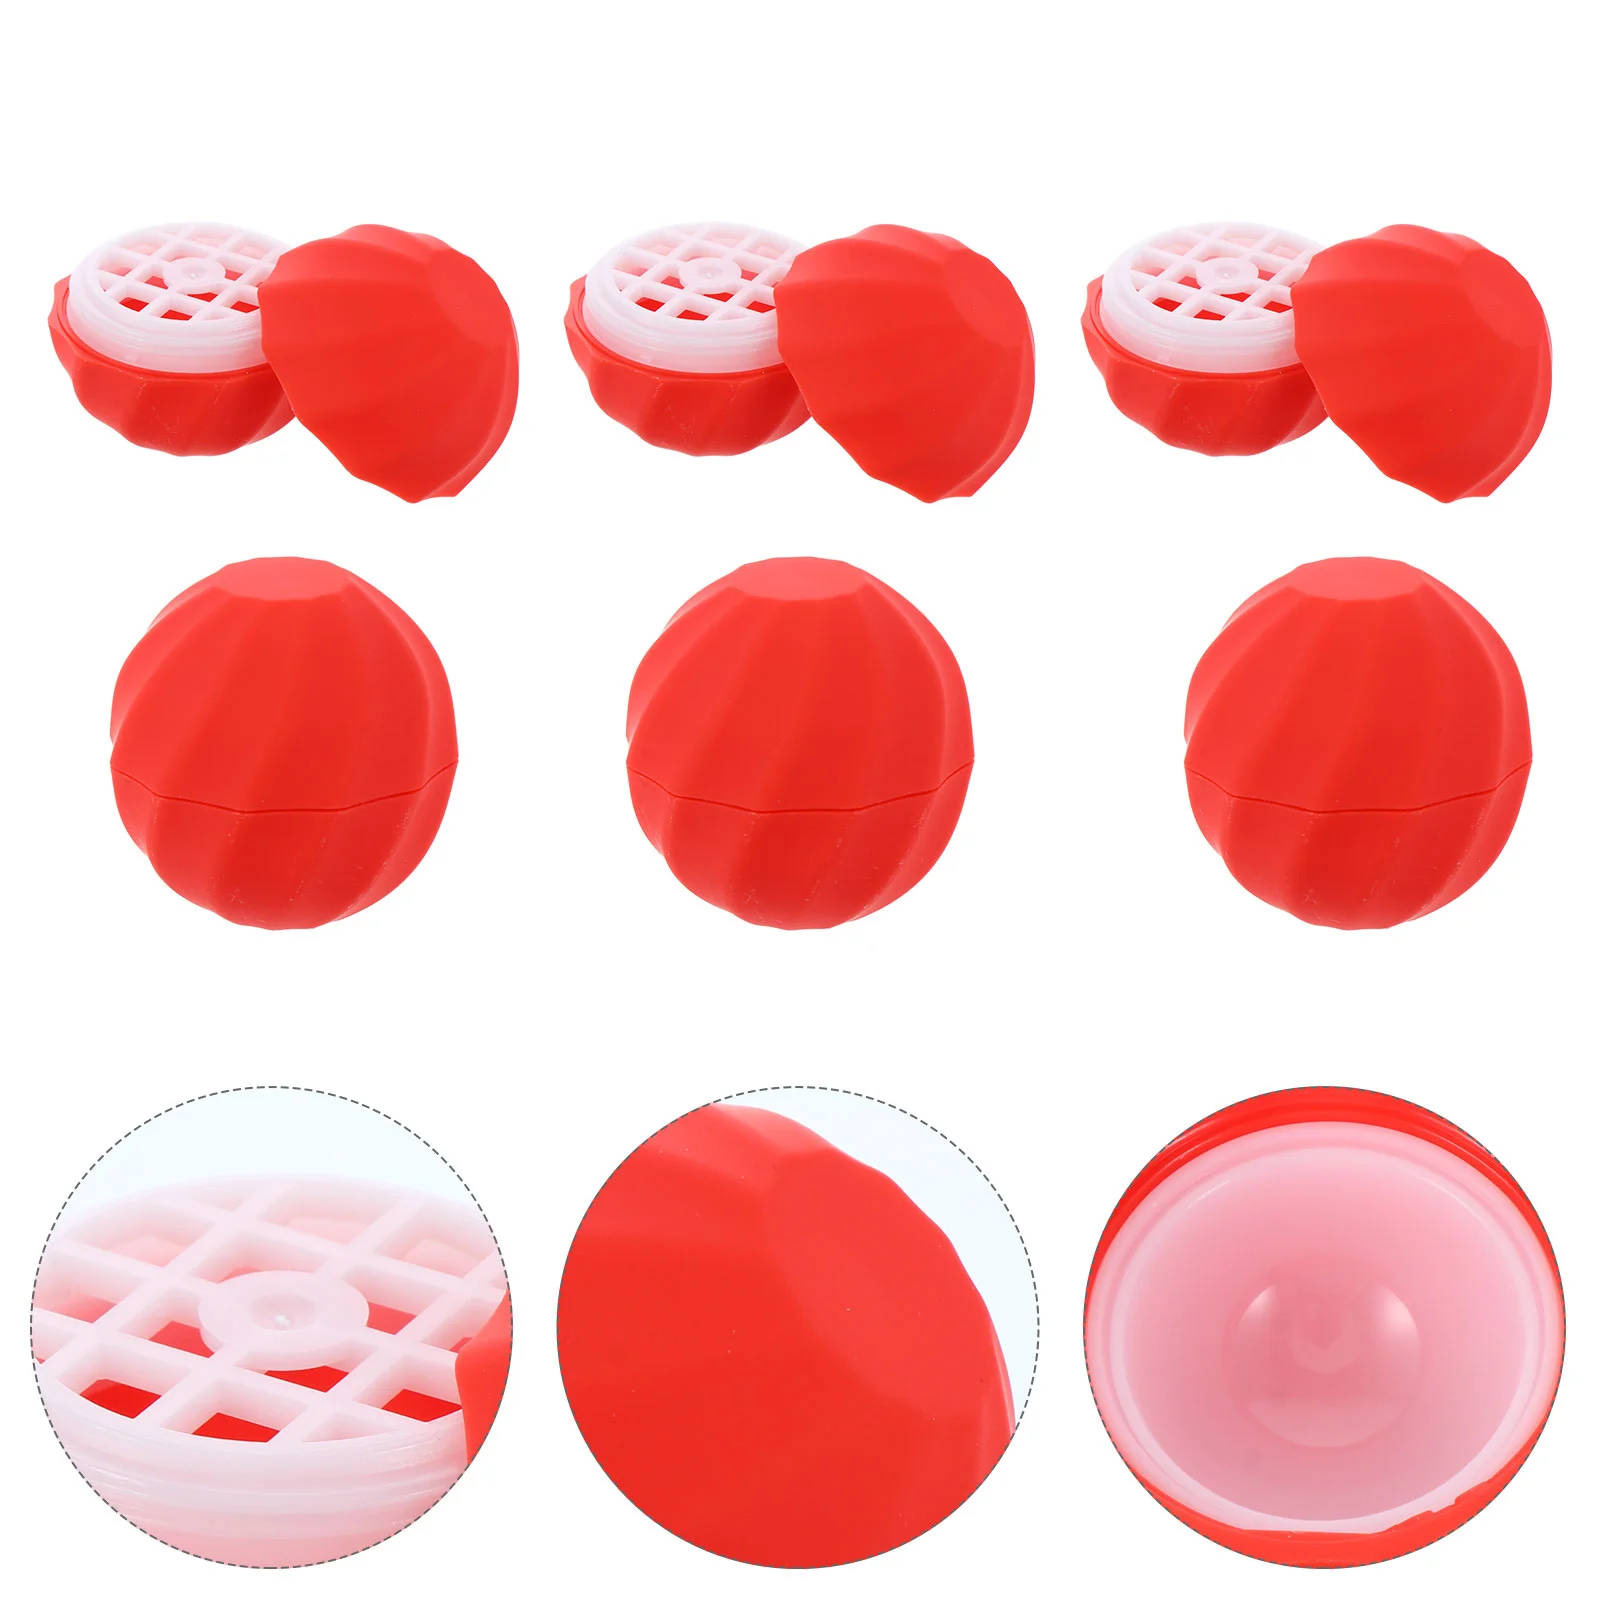 

10 Pcs Travel Containers Spherical Lipstick Case Holders Tubes Balm Sphere Plastic Empty